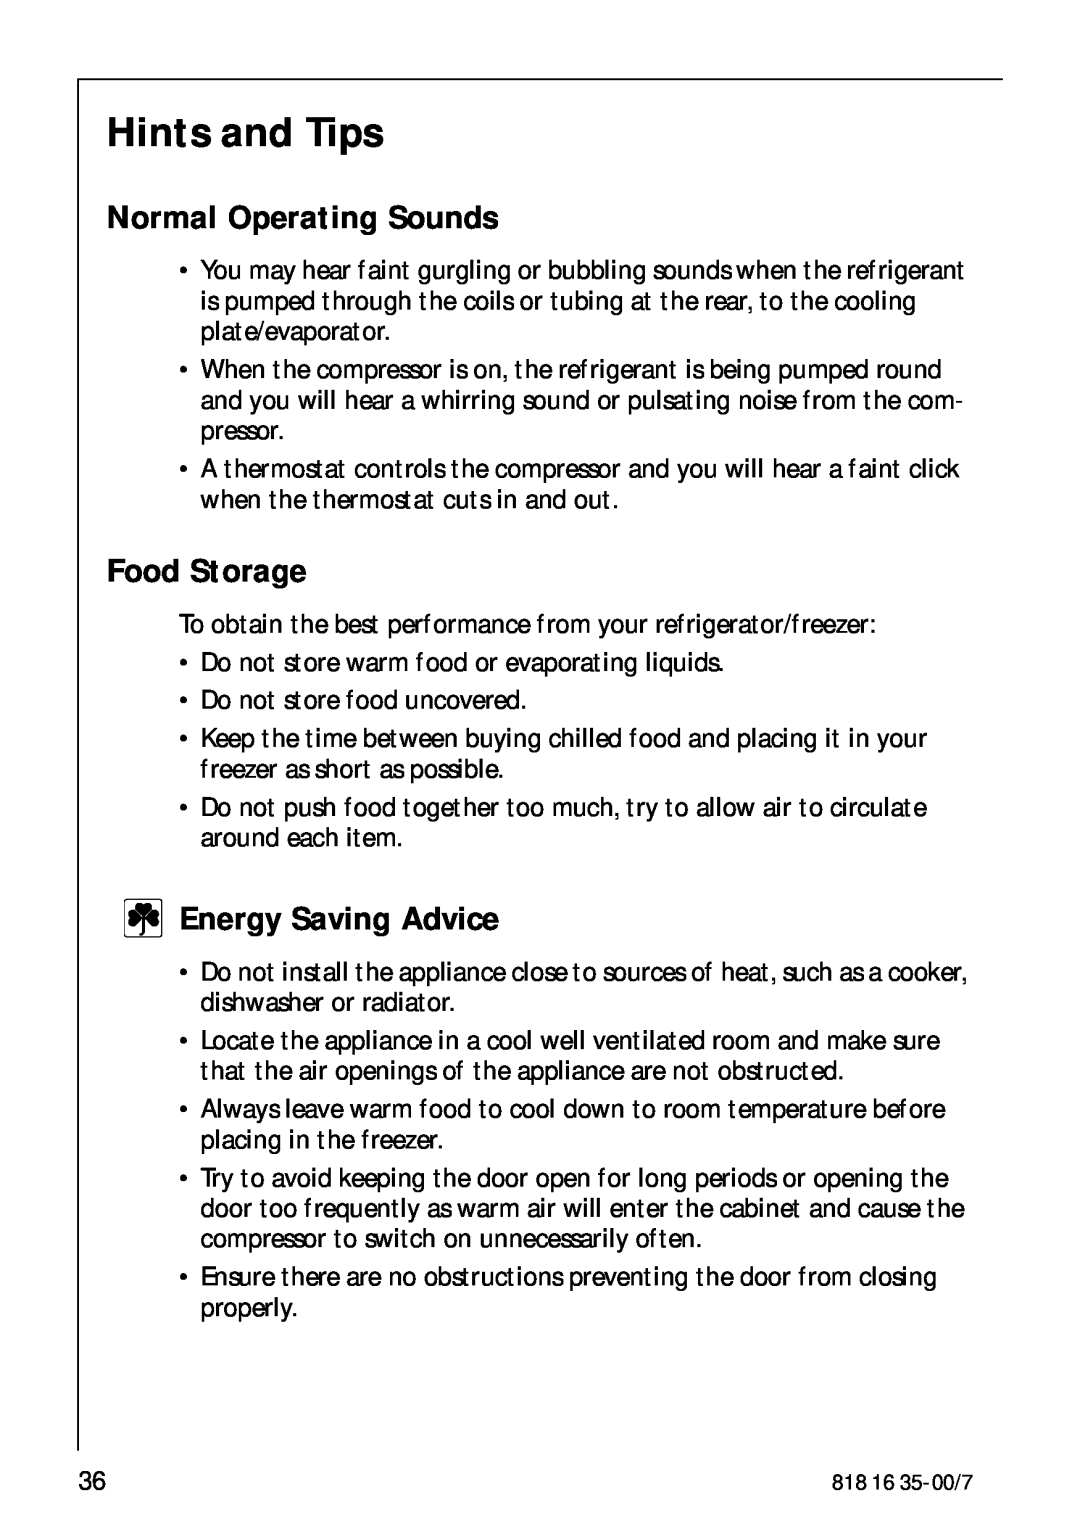 Electrolux KO_SANTO 4085 operating instructions Hints and Tips, Normal Operating Sounds, Food Storage, Energy Saving Advice 